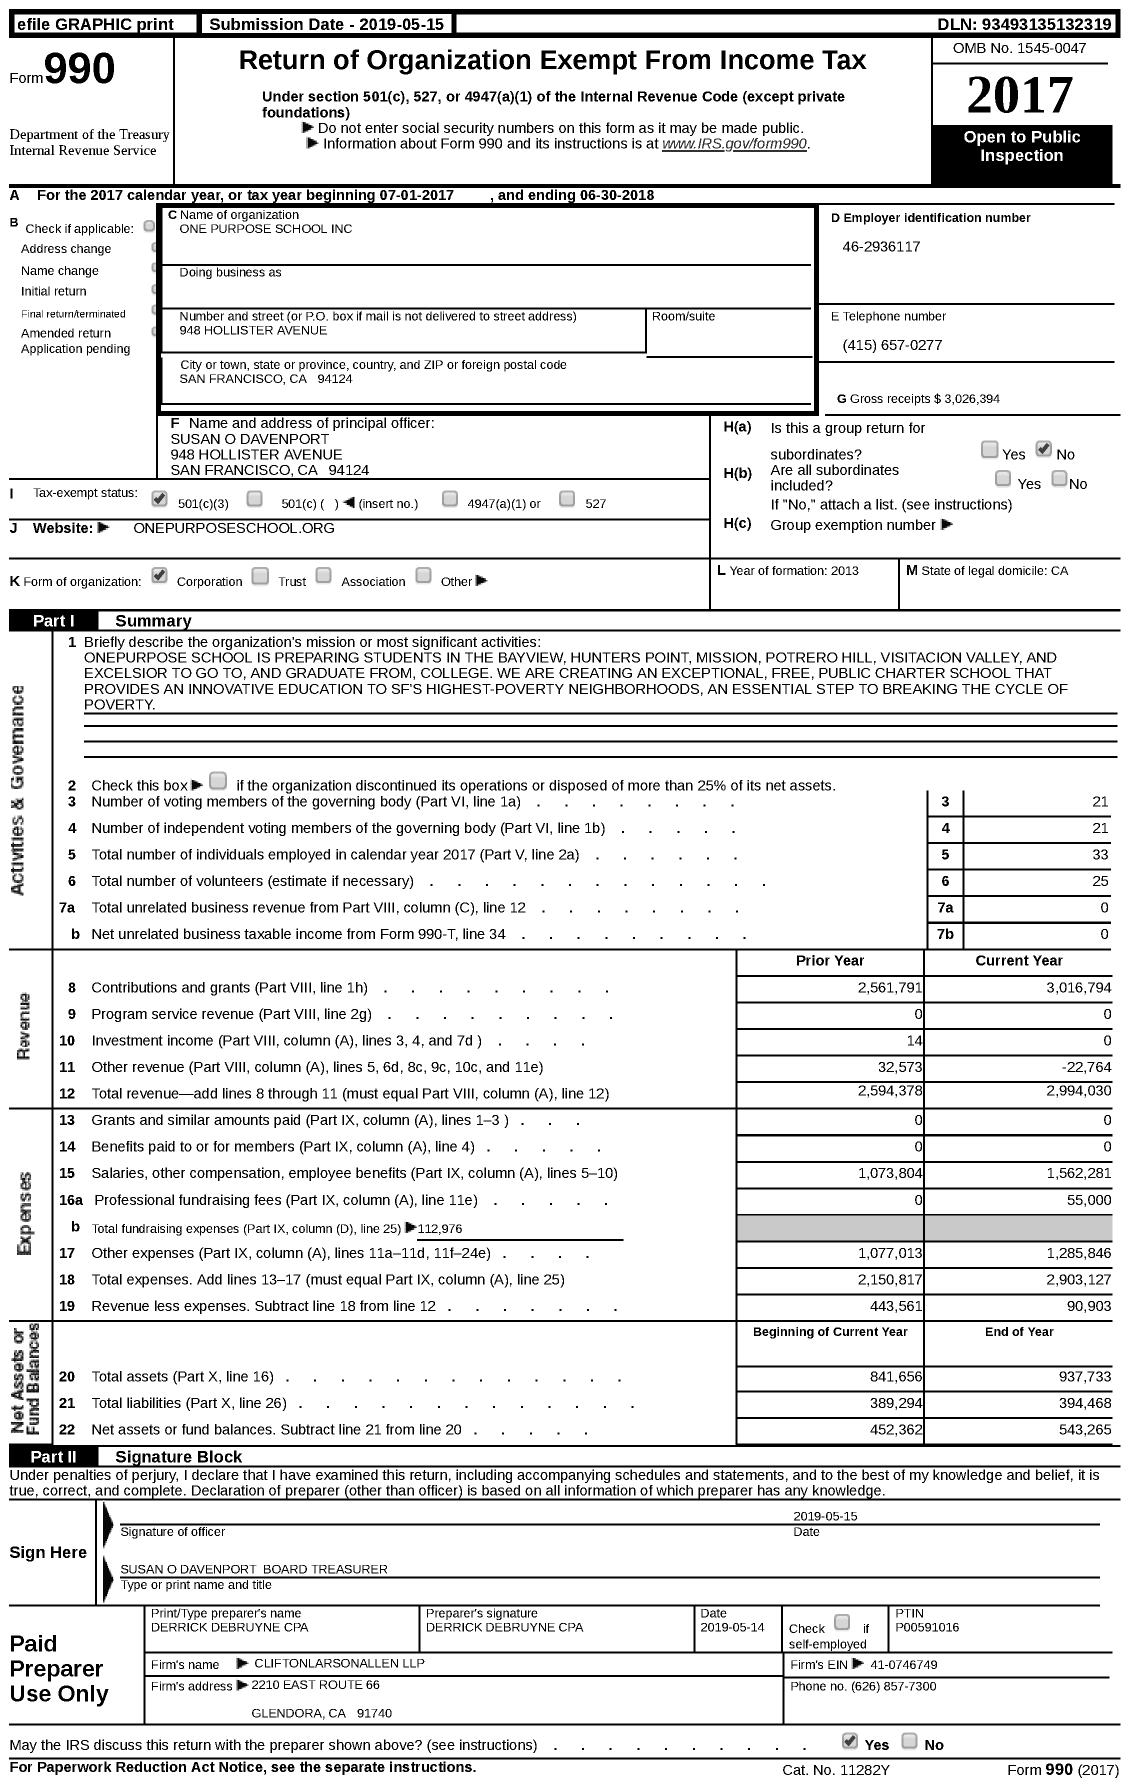 Image of first page of 2017 Form 990 for One Purpose School